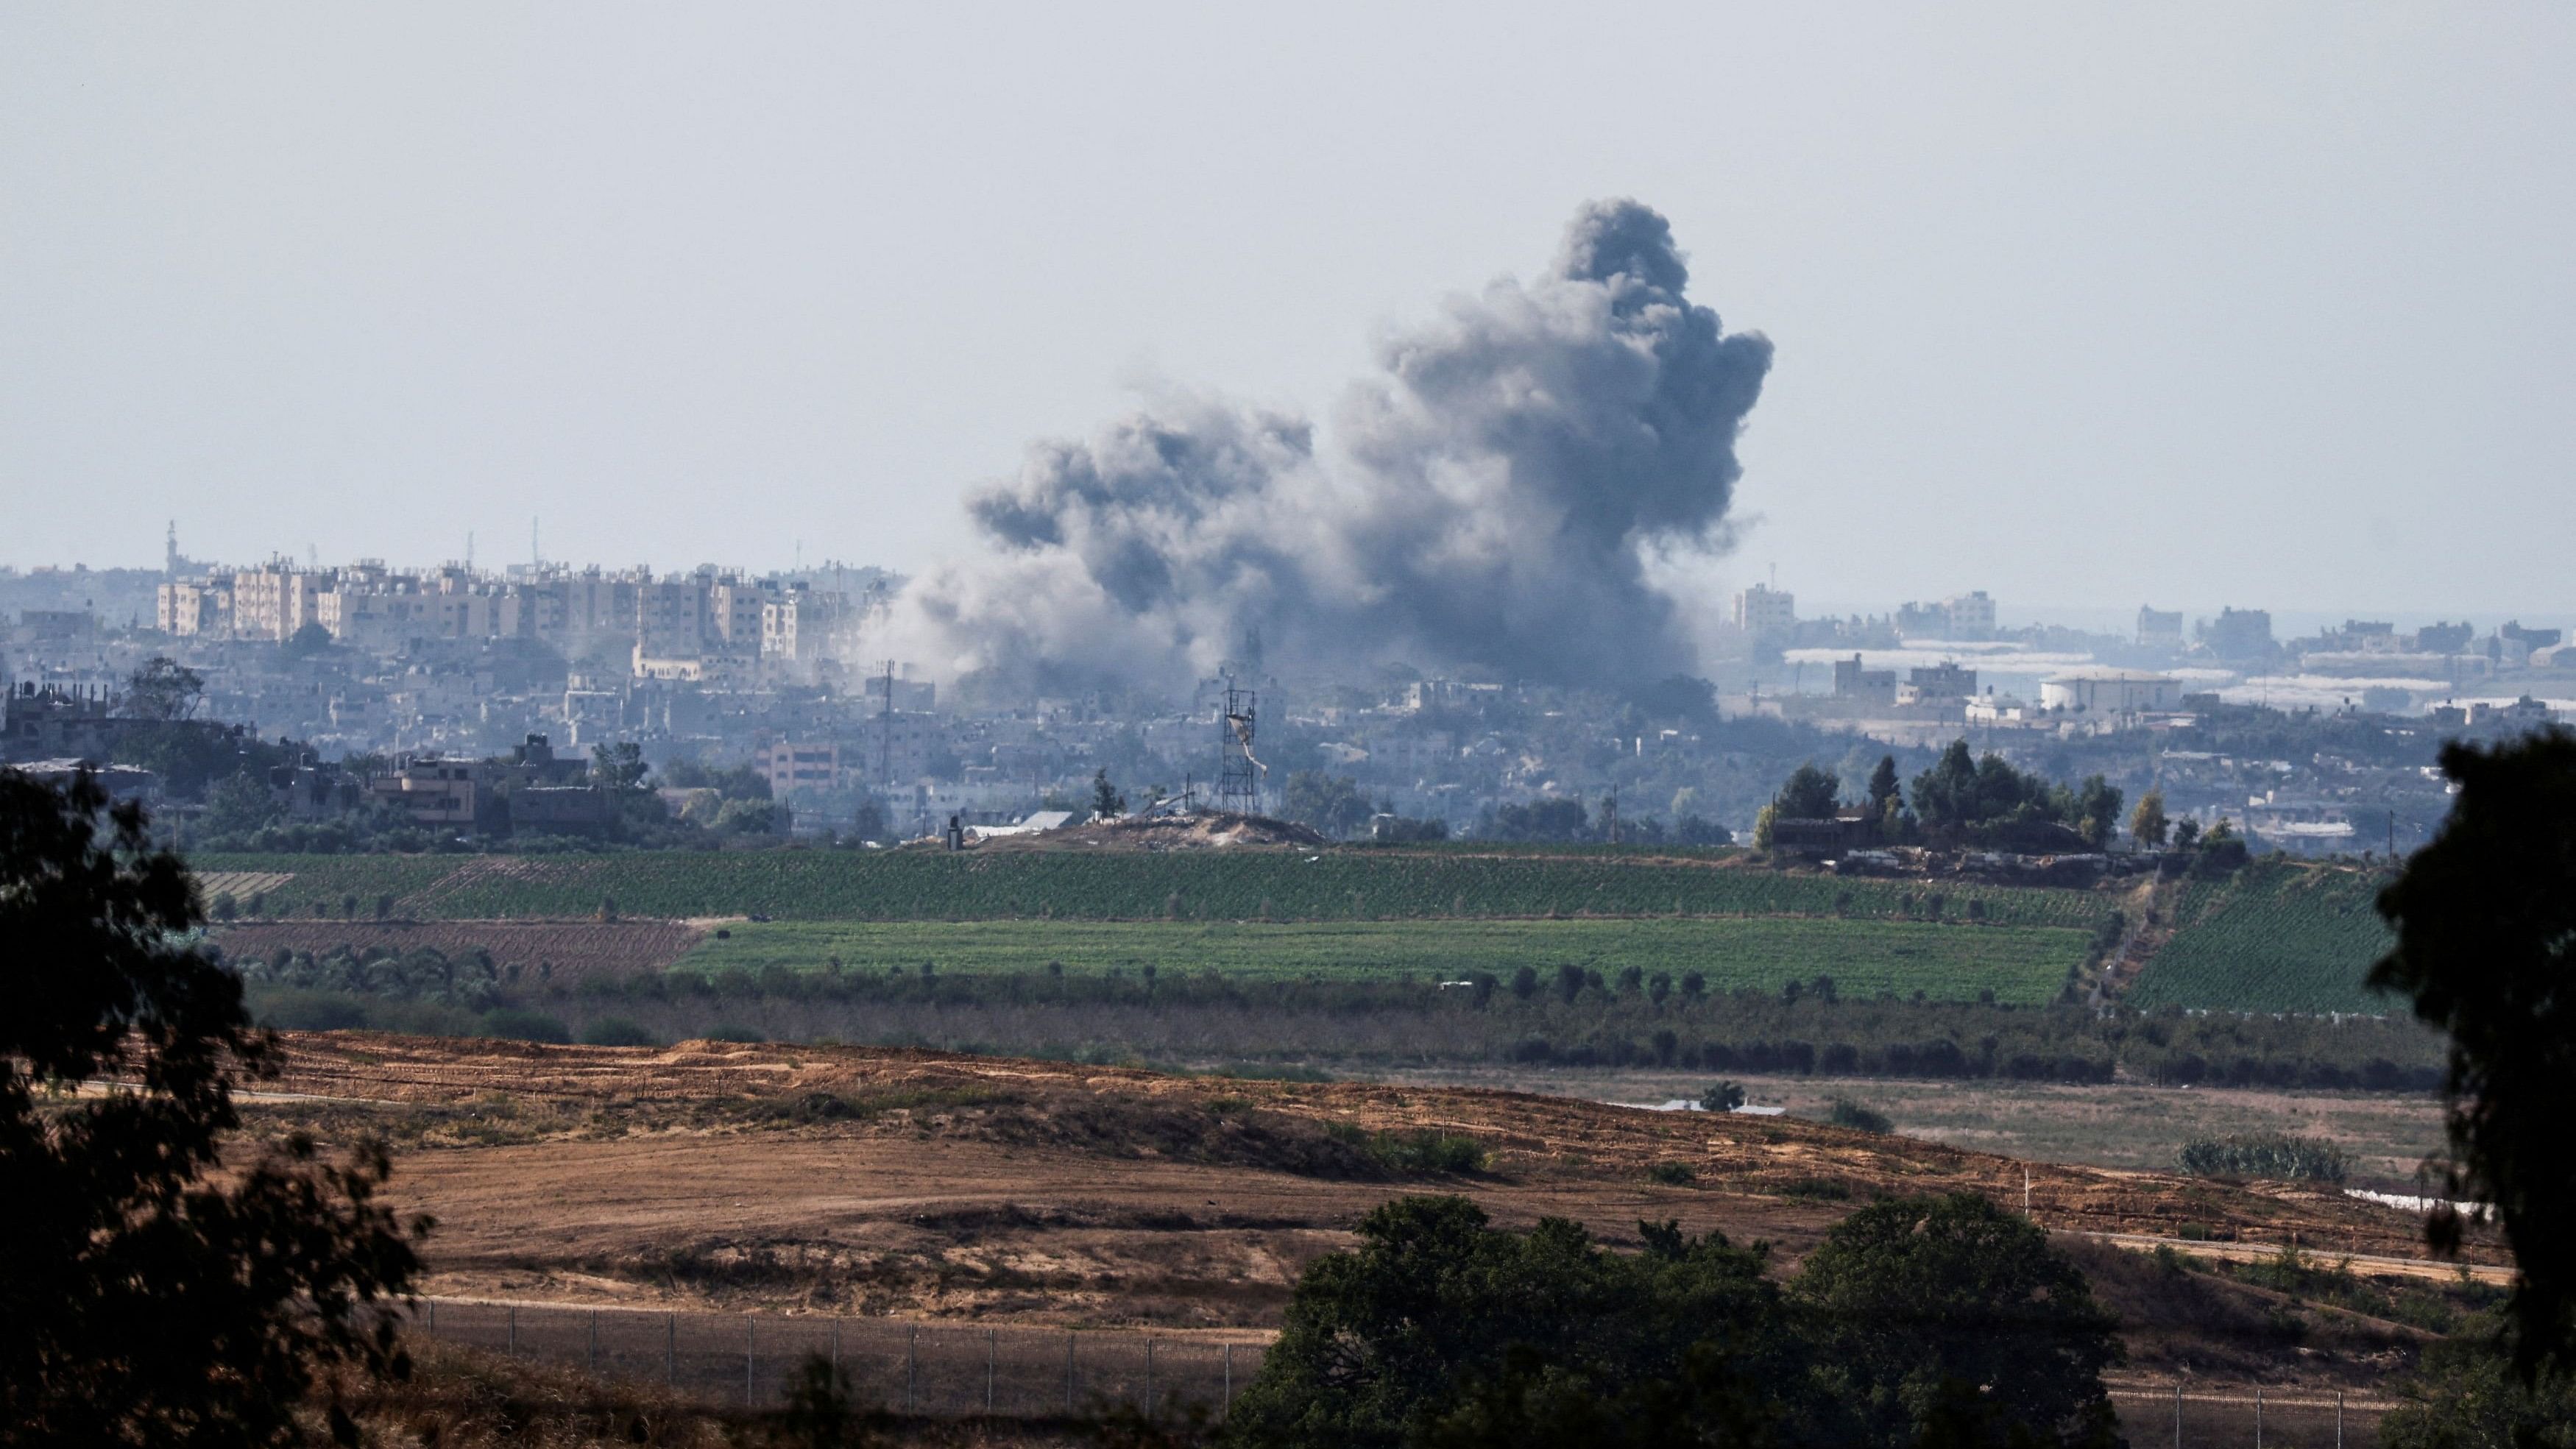 <div class="paragraphs"><p>Smoke rises in the air following Israeli bombings in Gaza, as seen from Israel's border with the Gaza Strip.</p></div>